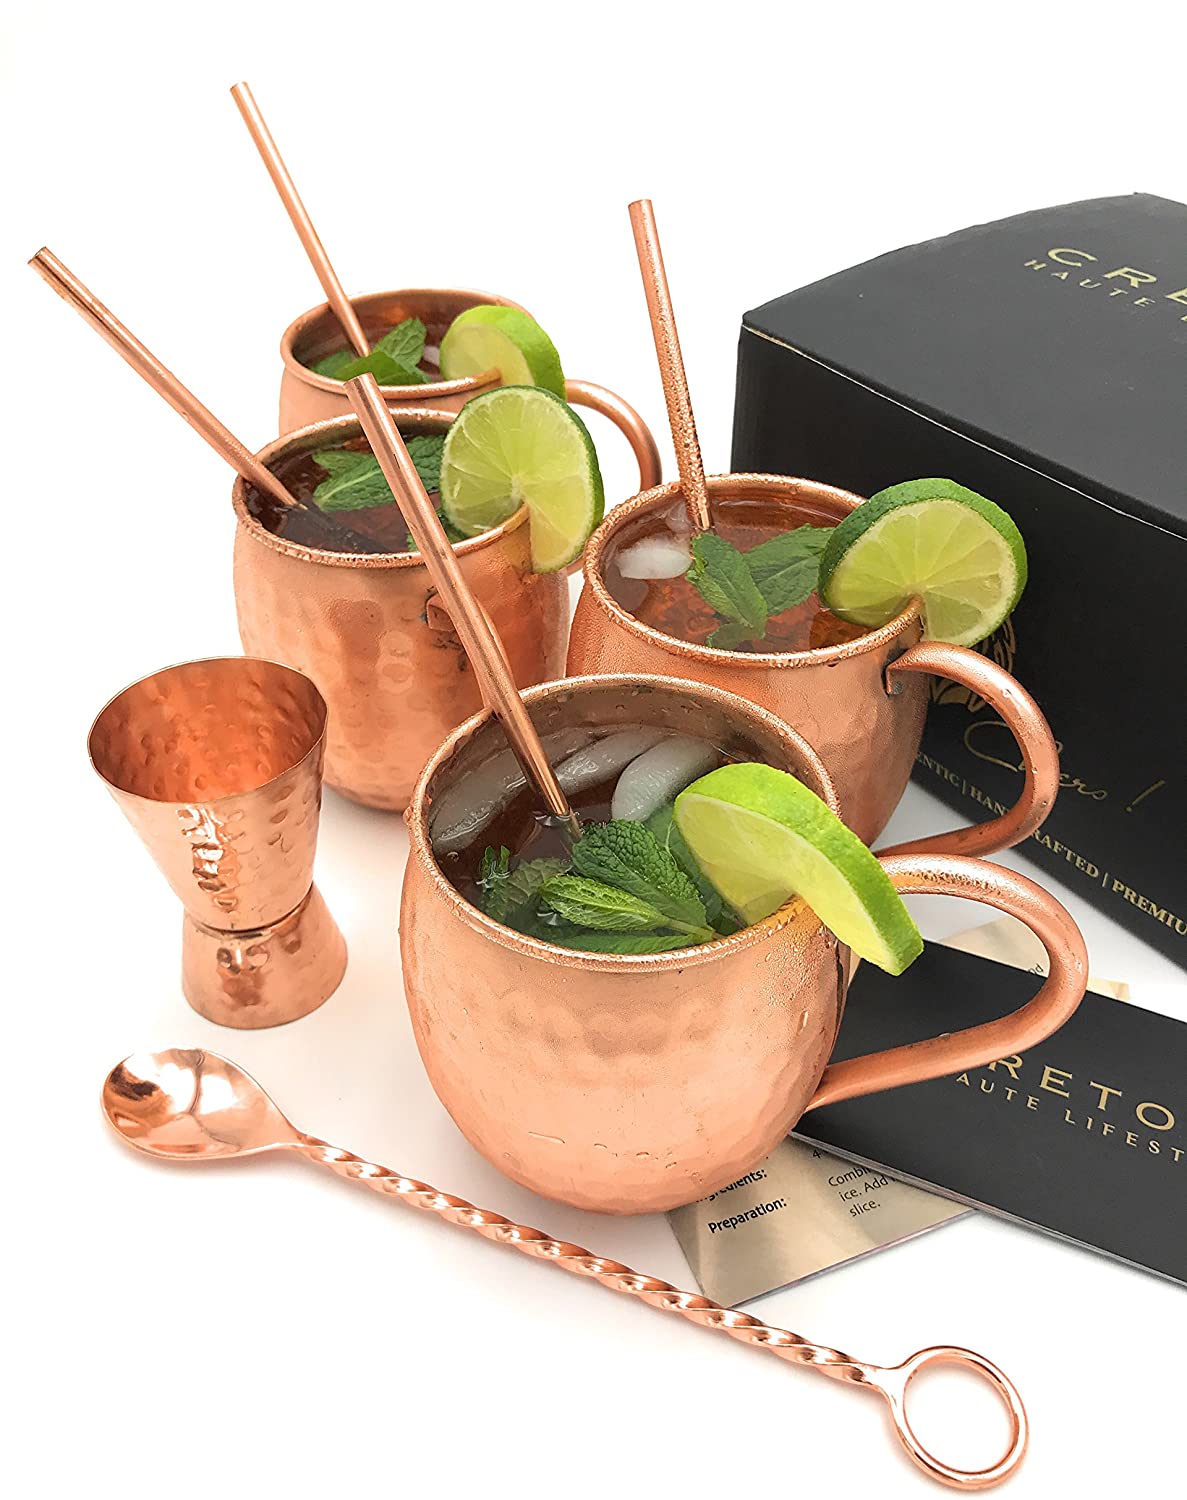 Cretoni Copperlin Pure Copper Hammered Moscow Mule Mugs Set of 4 with BONUS Hammered Jigger & Twisted Bar Spoon Handcrafted 16 oz MUGS WITH 4 Copper Straws The Ultimate Gift set! 